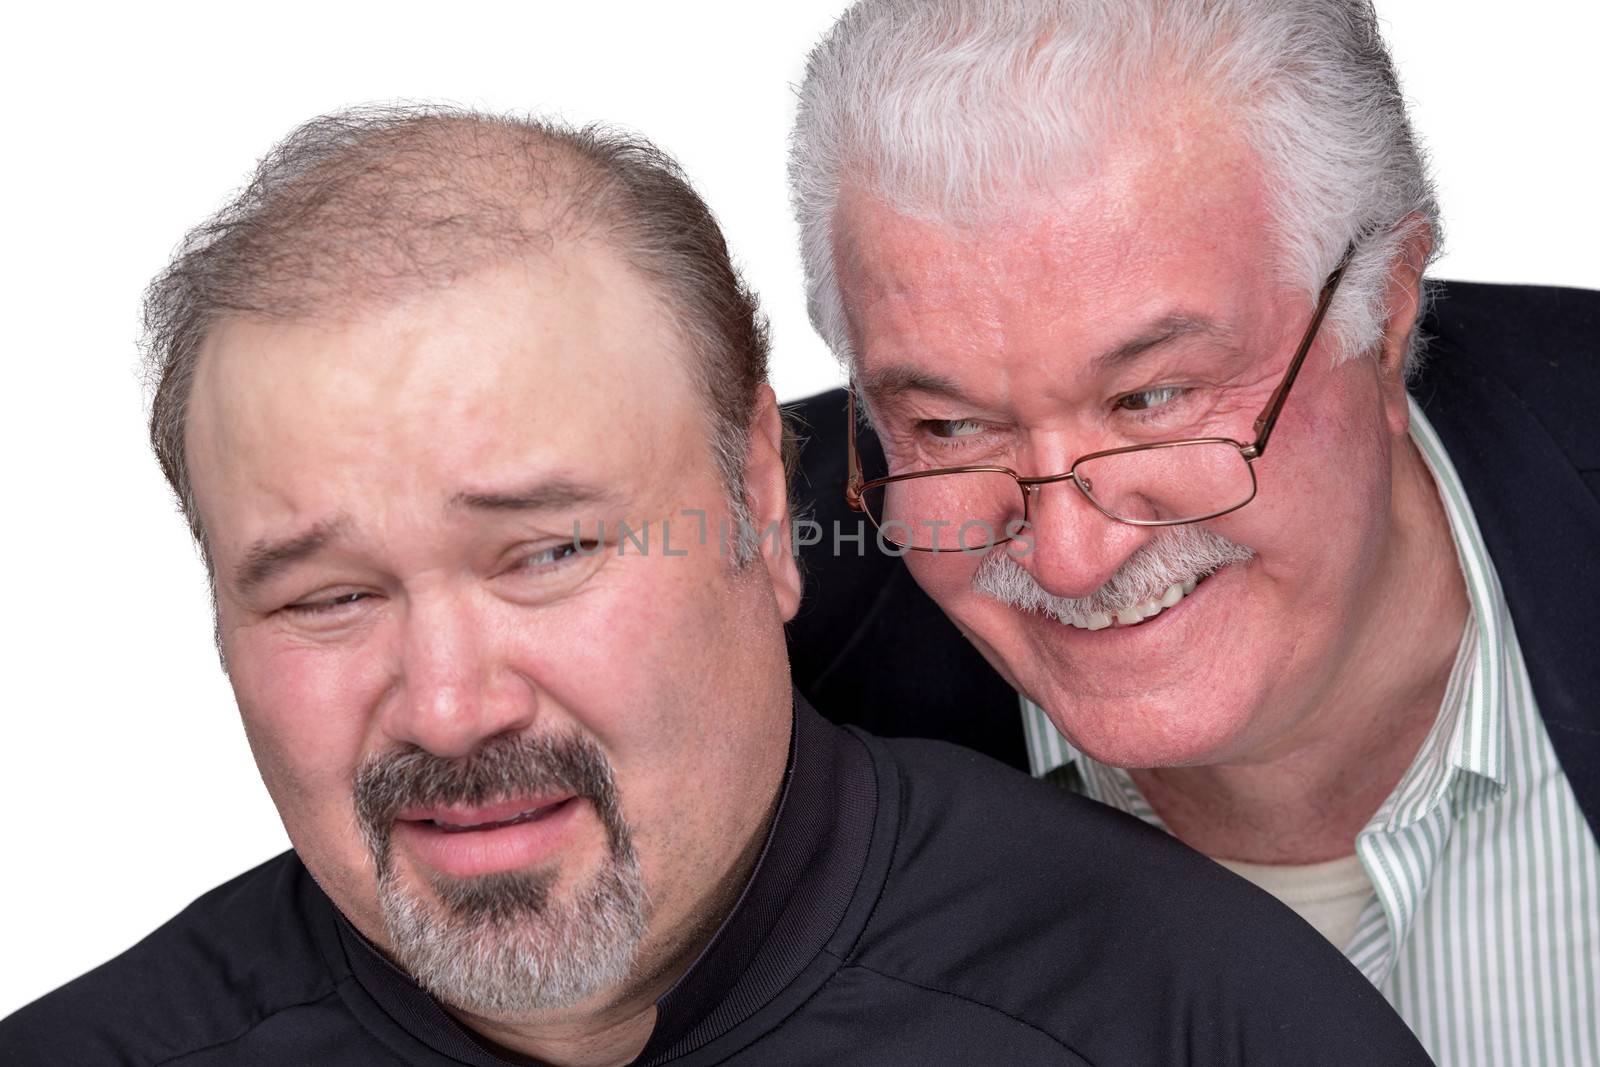 Older man got in to personal space of a younger man. Younger man showing his emotions with unpleasent face